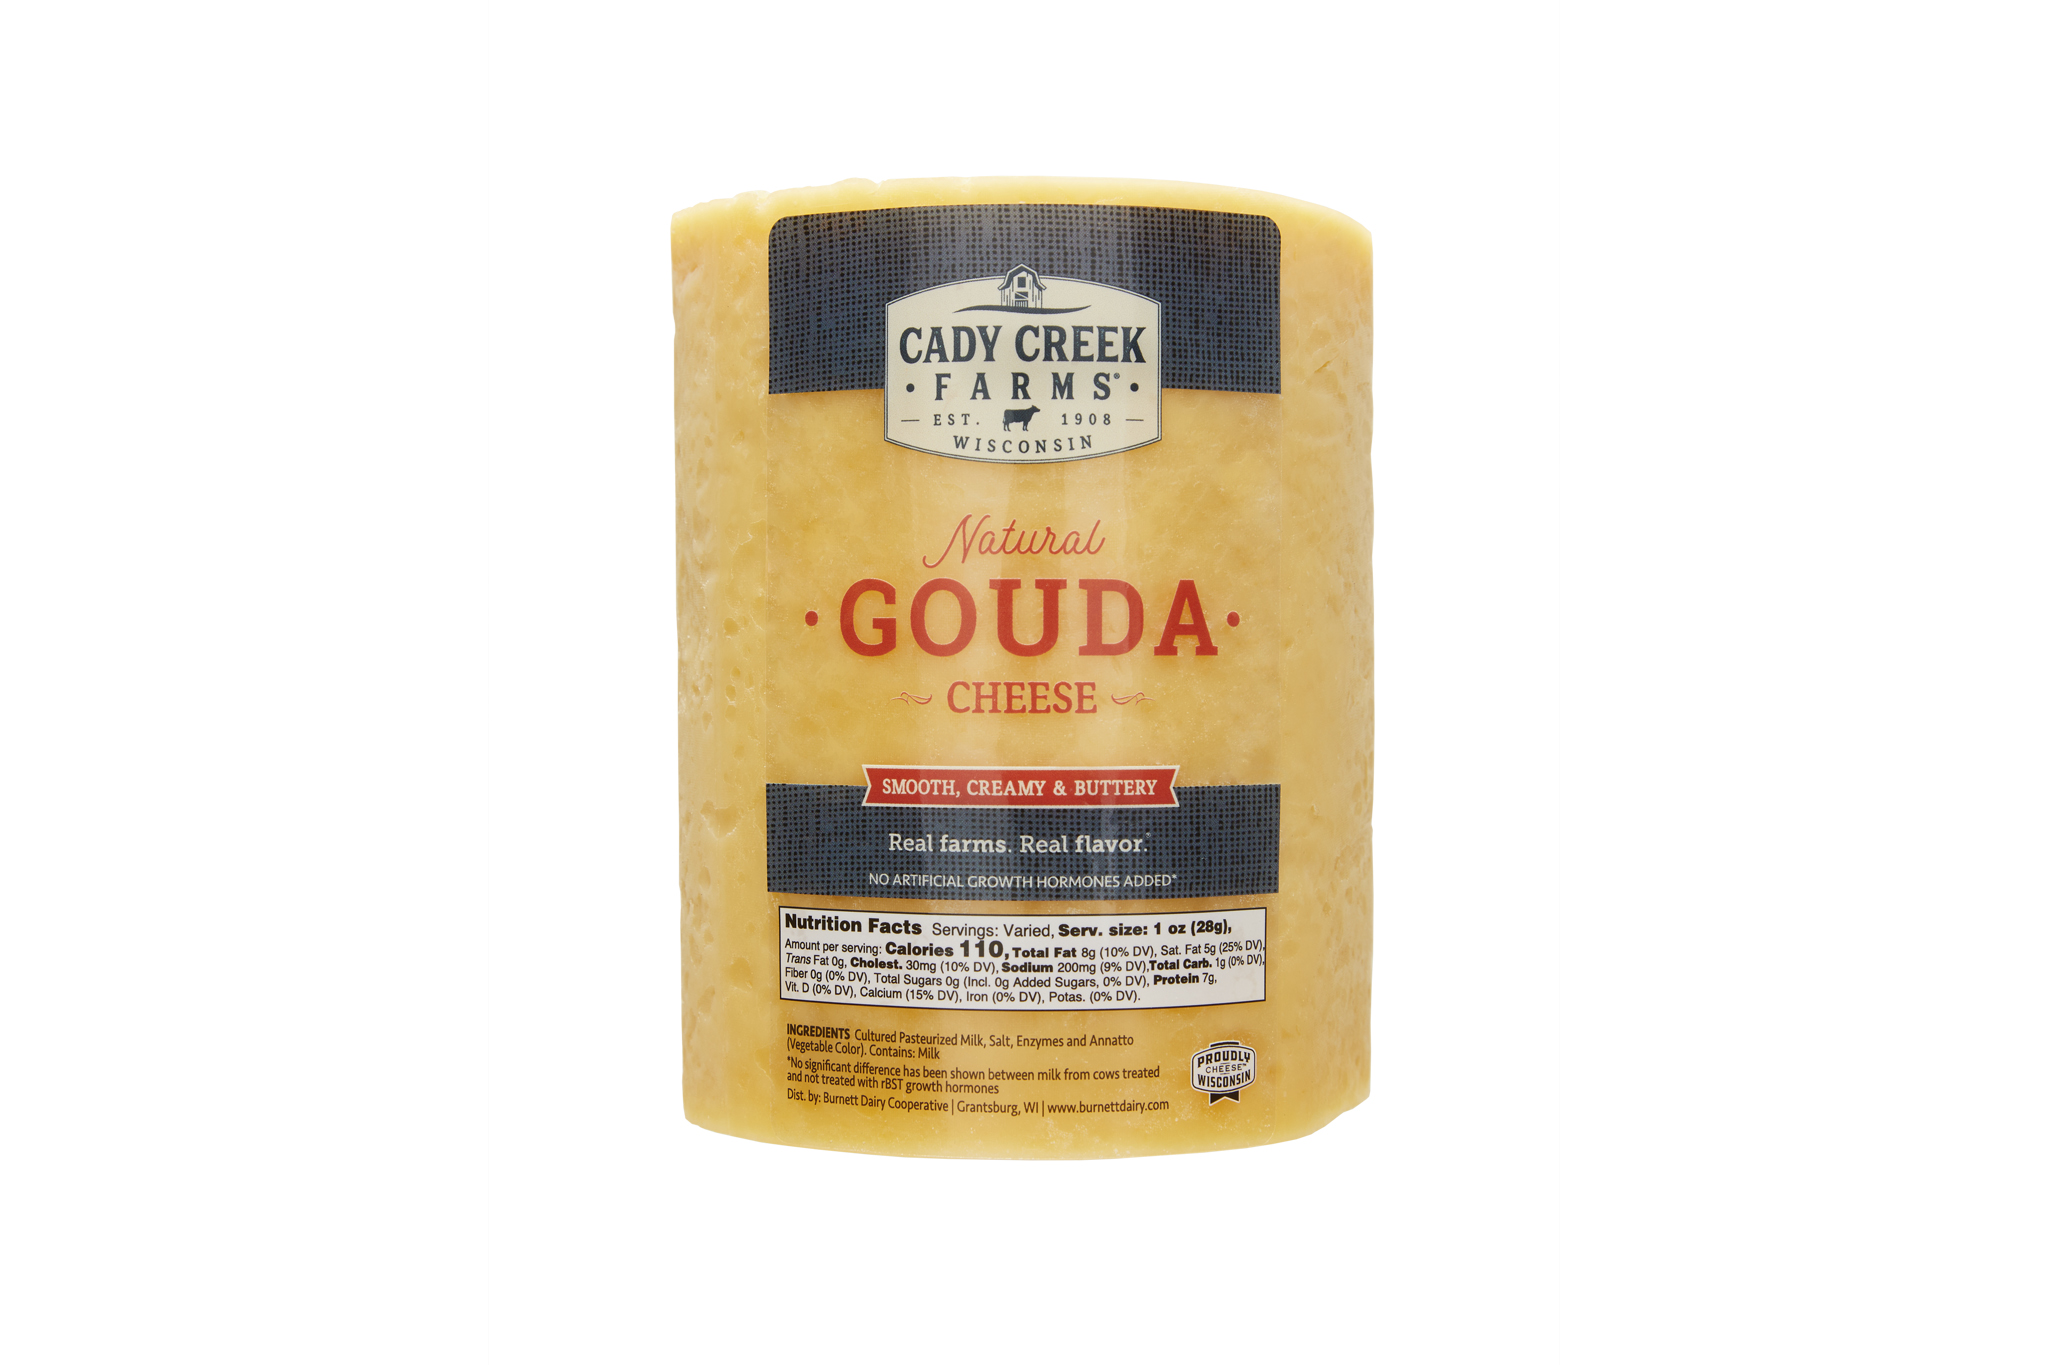 Cady Creek Fhttps://www.burnettdairy.com/sites/default/files/styles/thumbnail/public/2021-07/CCF_7oz_Natural%20Gouda_FrontF_PATH2_web.png?itok=vwYn1YlEarms Gouda 3 lb front in package